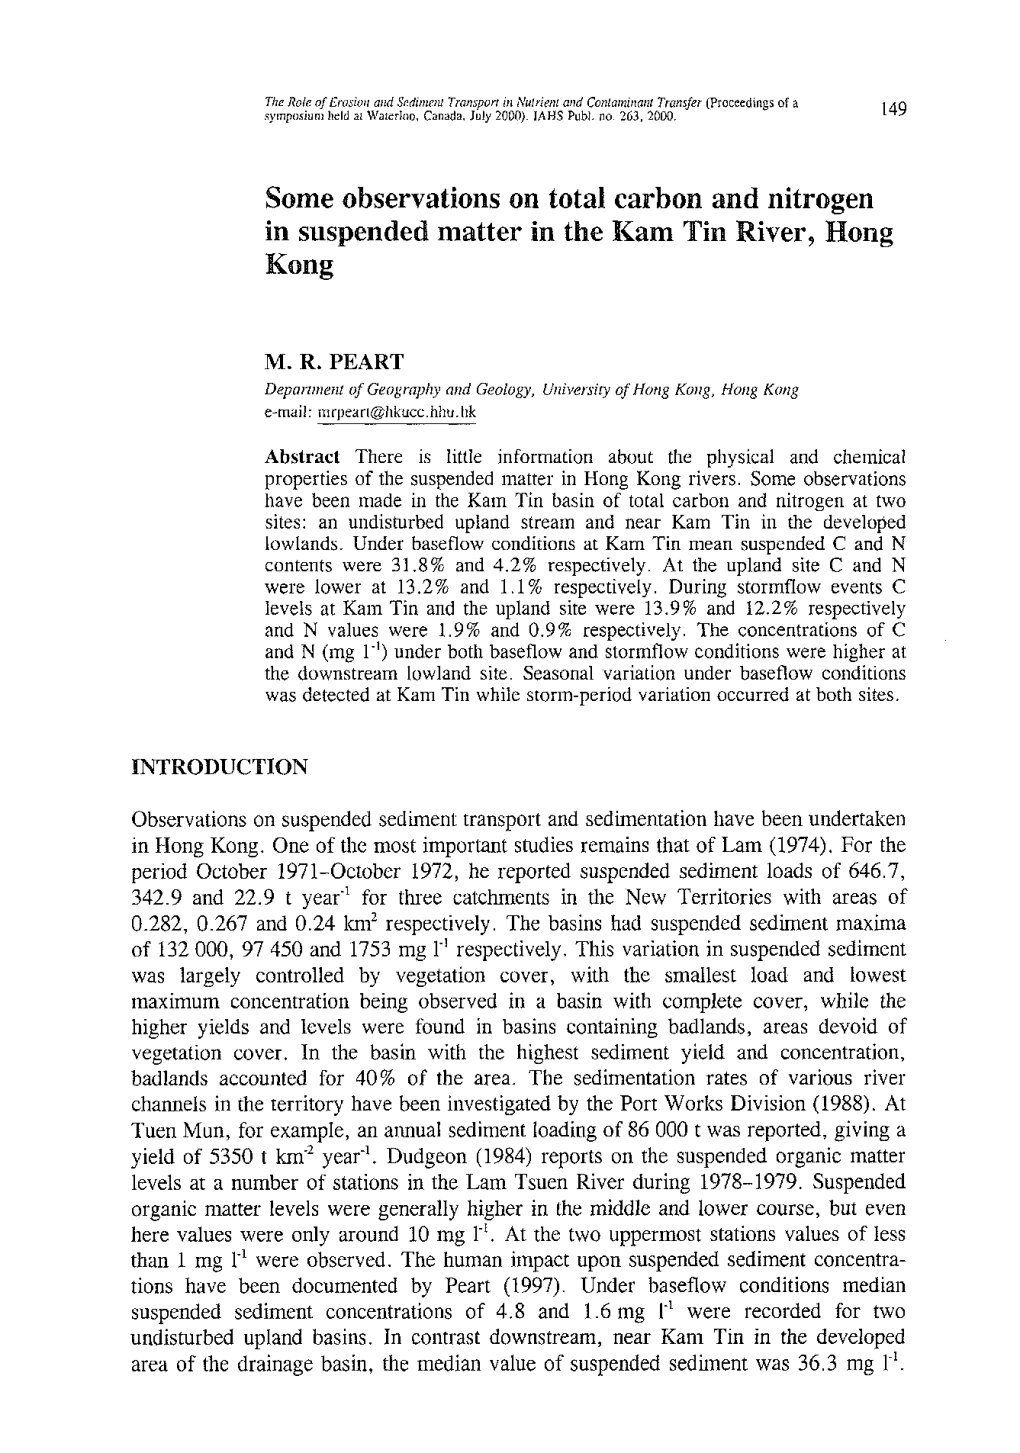 Some Observations on Total Carbon and Nitrogen in Suspended Matter in the Kam Tin River, Hong Kong